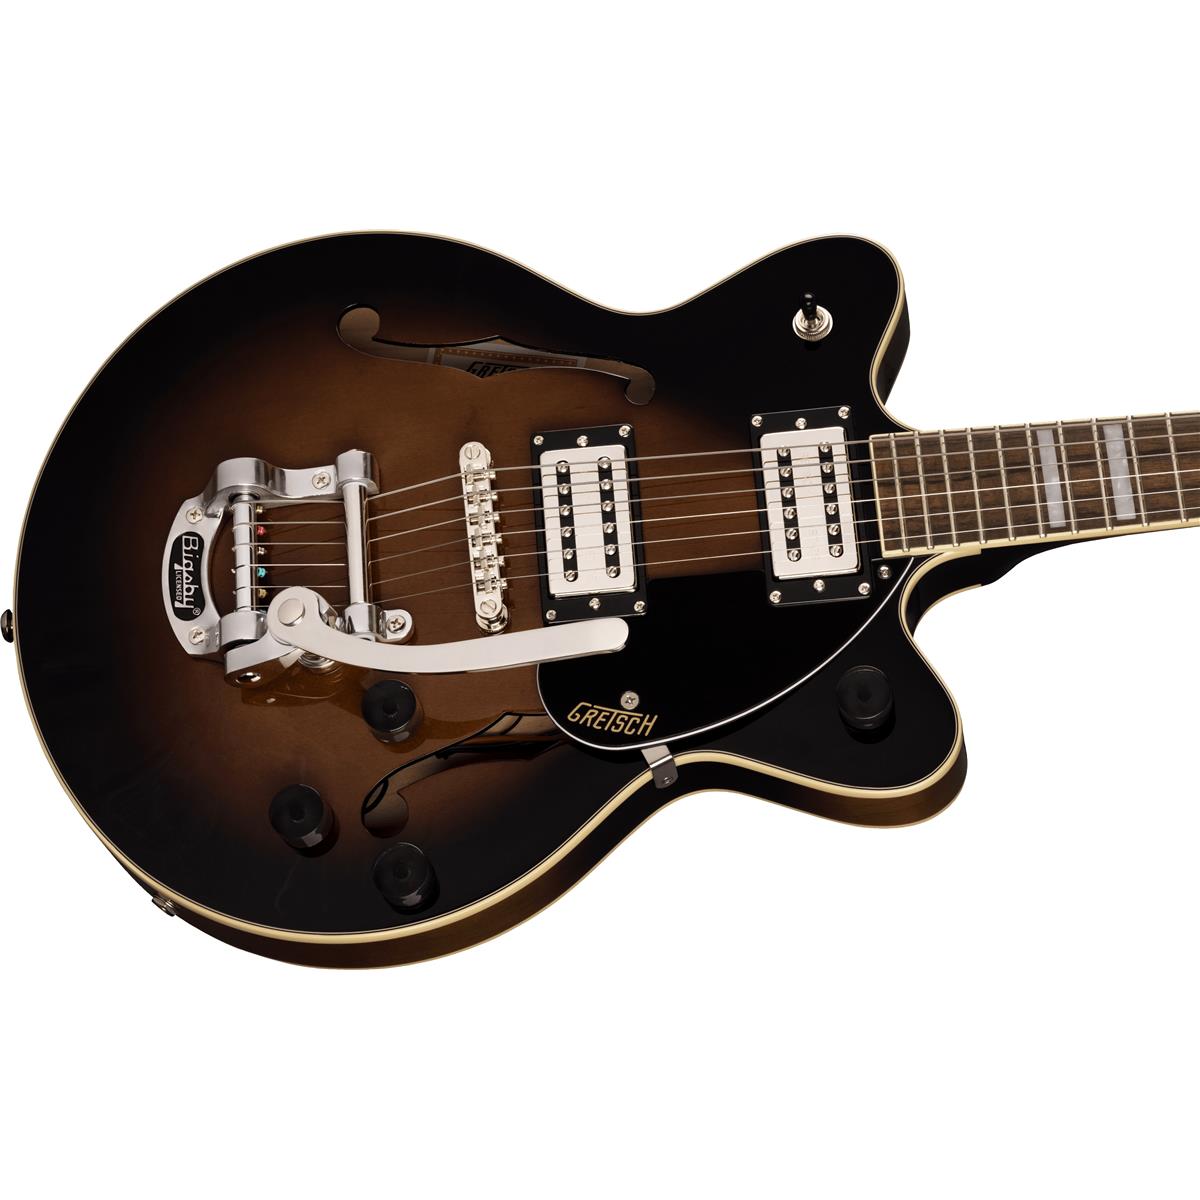 Gretsch G2655T Streamliner Center Block Jr. Double-Cut Bigsby Electric Guitar $259 + free s/h